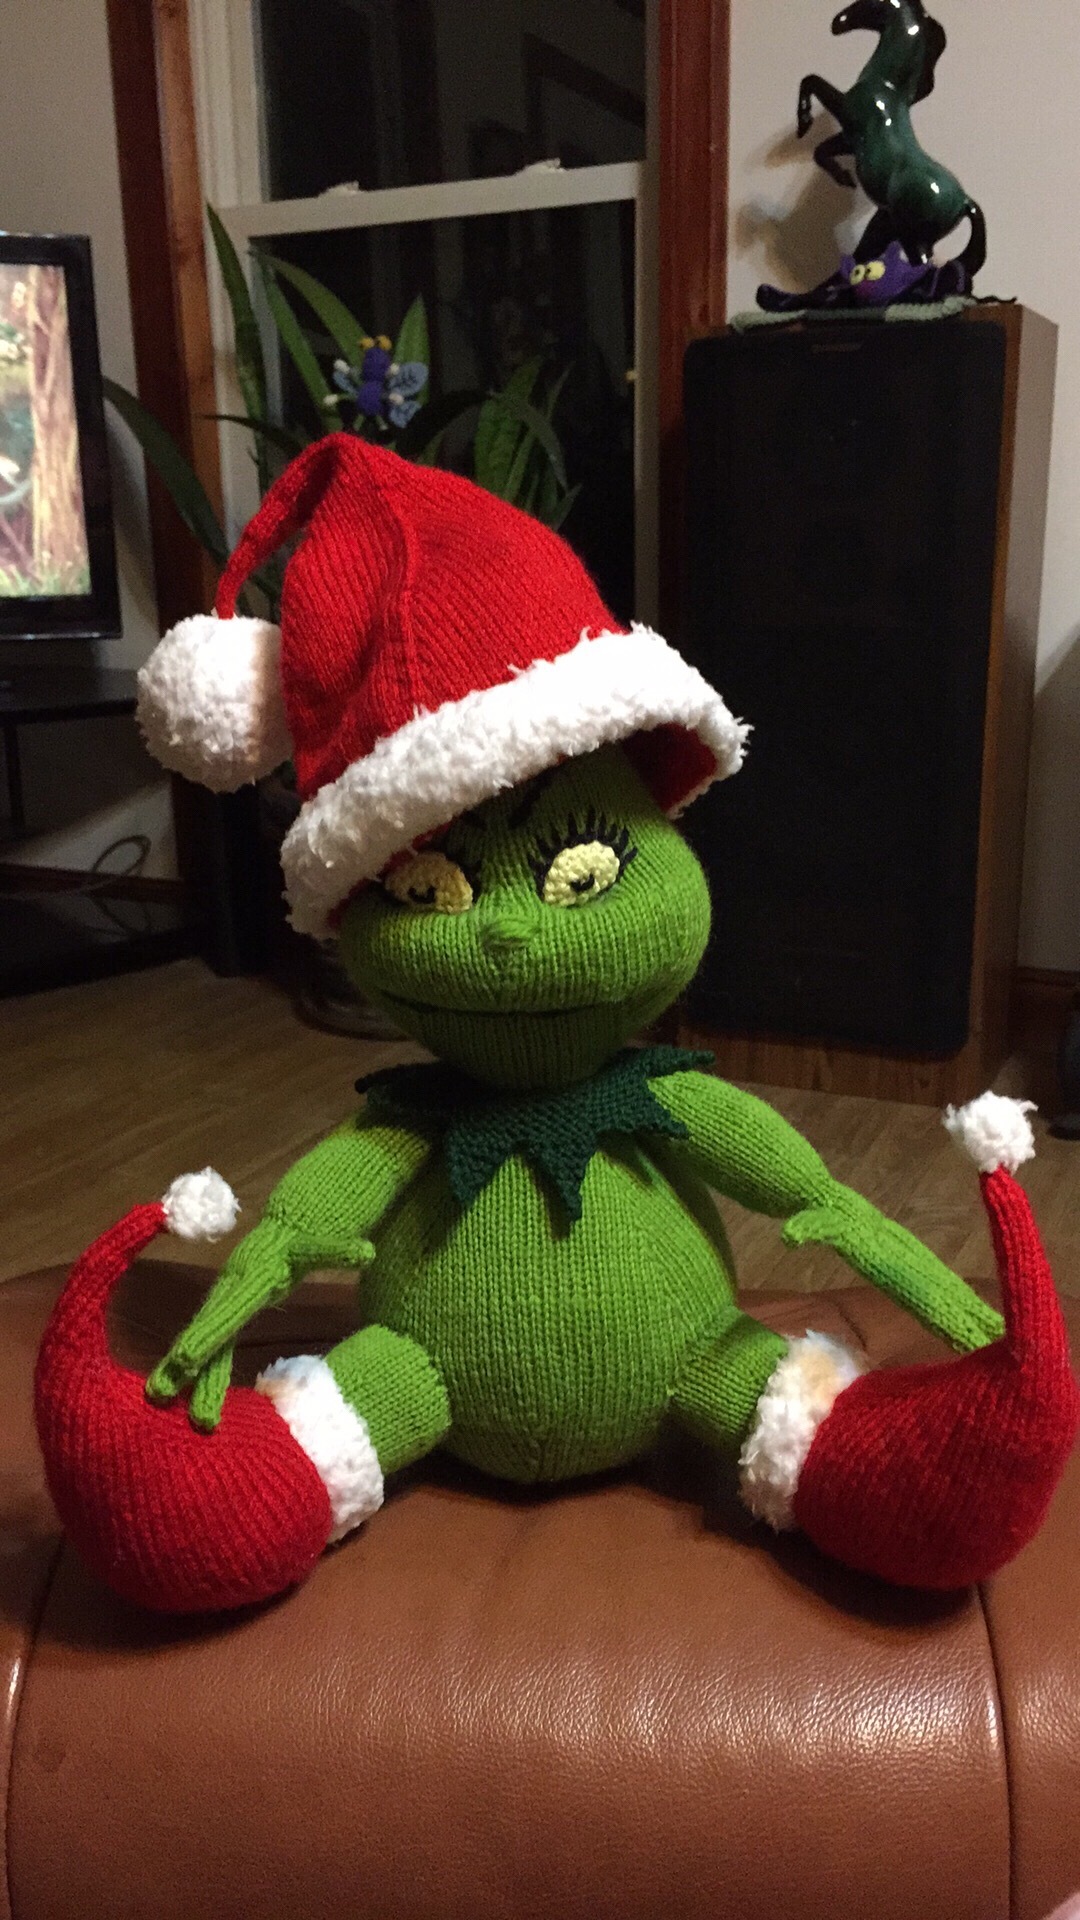 Knitted Grinch knitting project by Toni R LoveKnitting